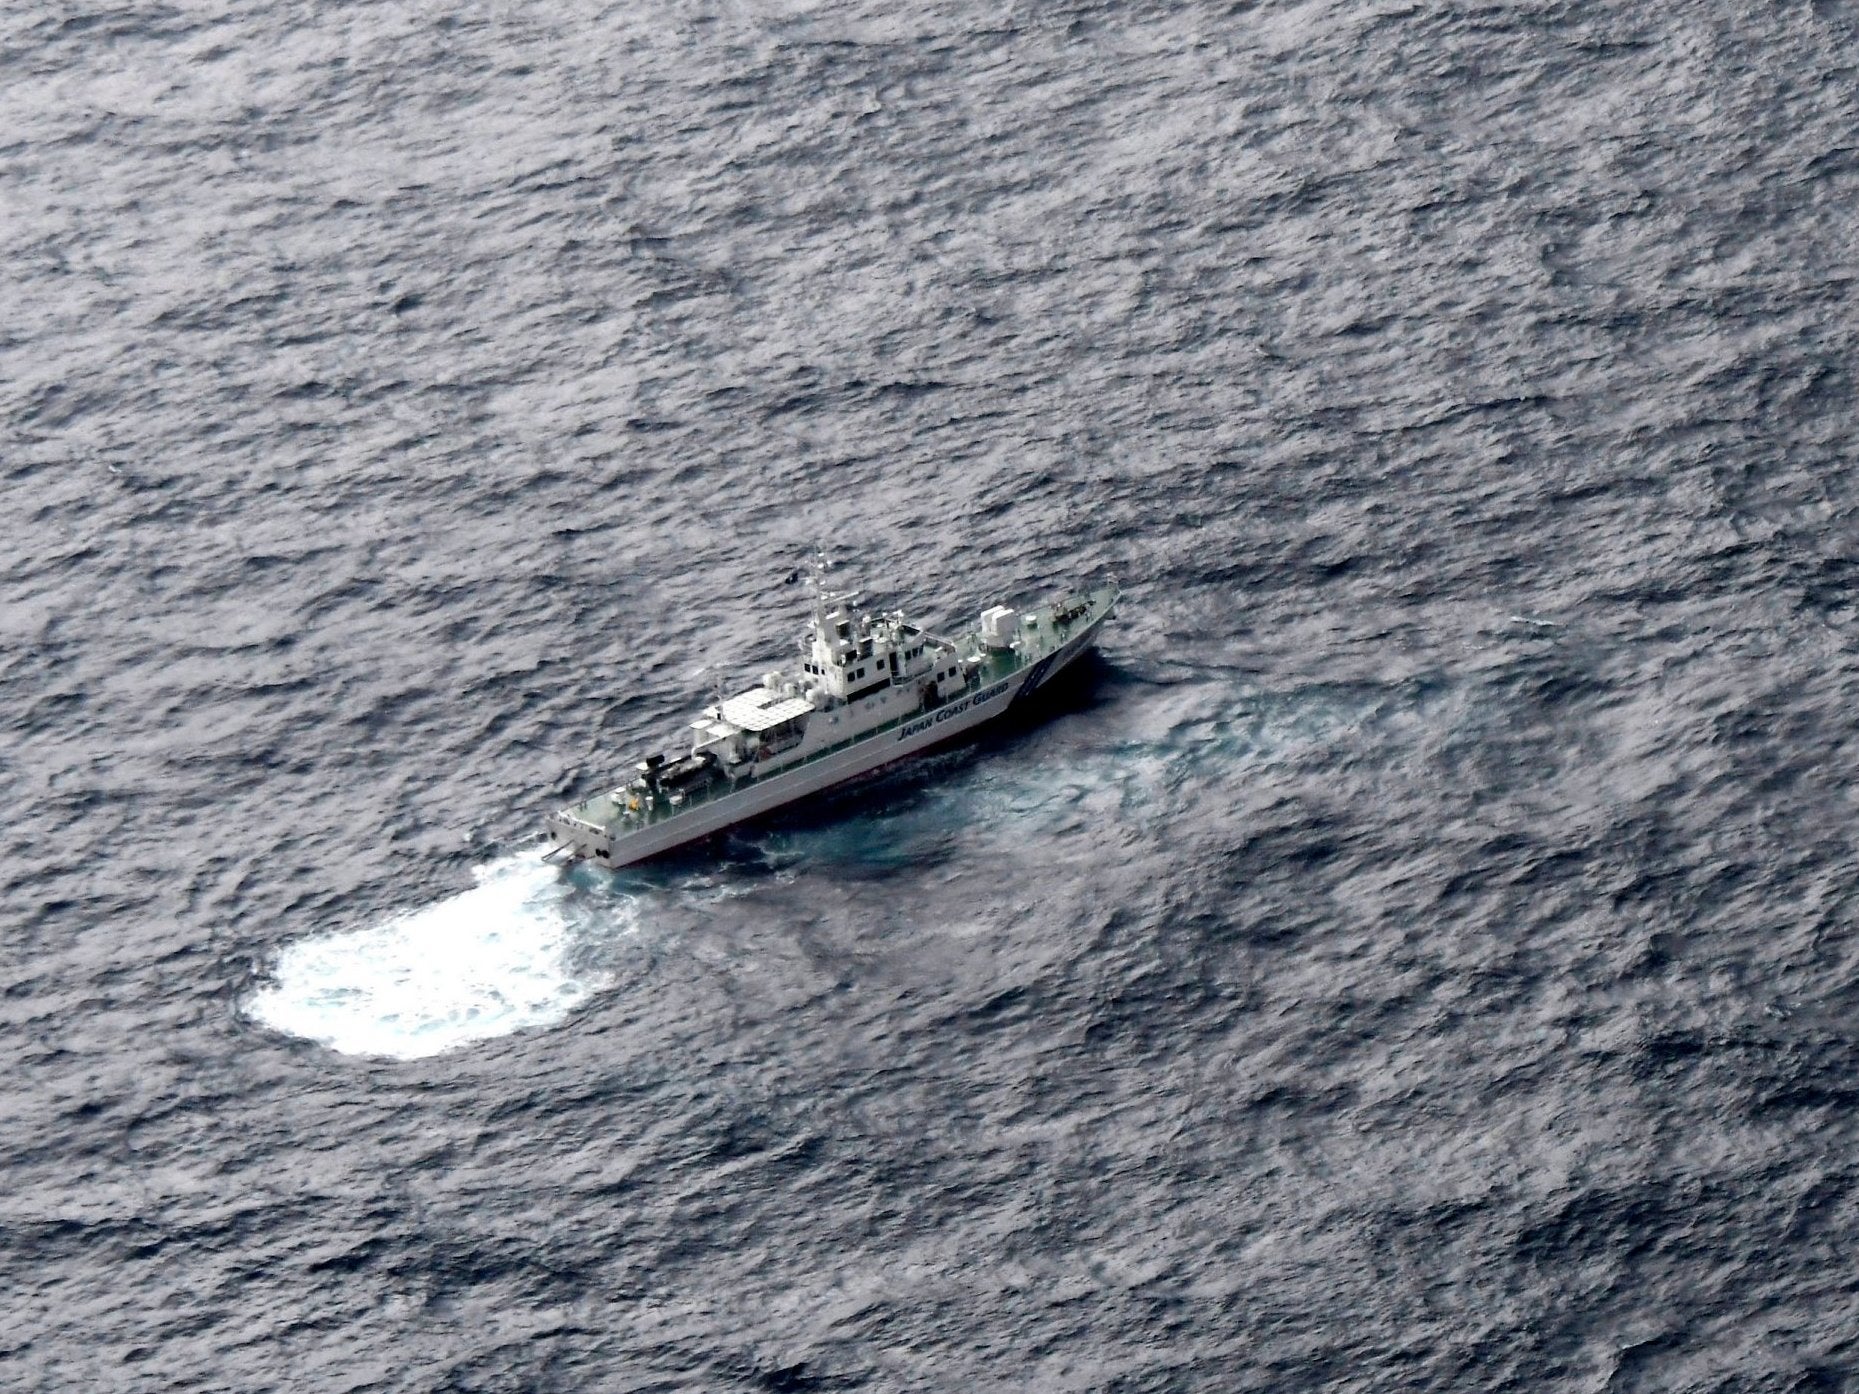 Japan's Coast Guard ship is seen at sea during a search operation for US Marine refueling plane and fighter jet